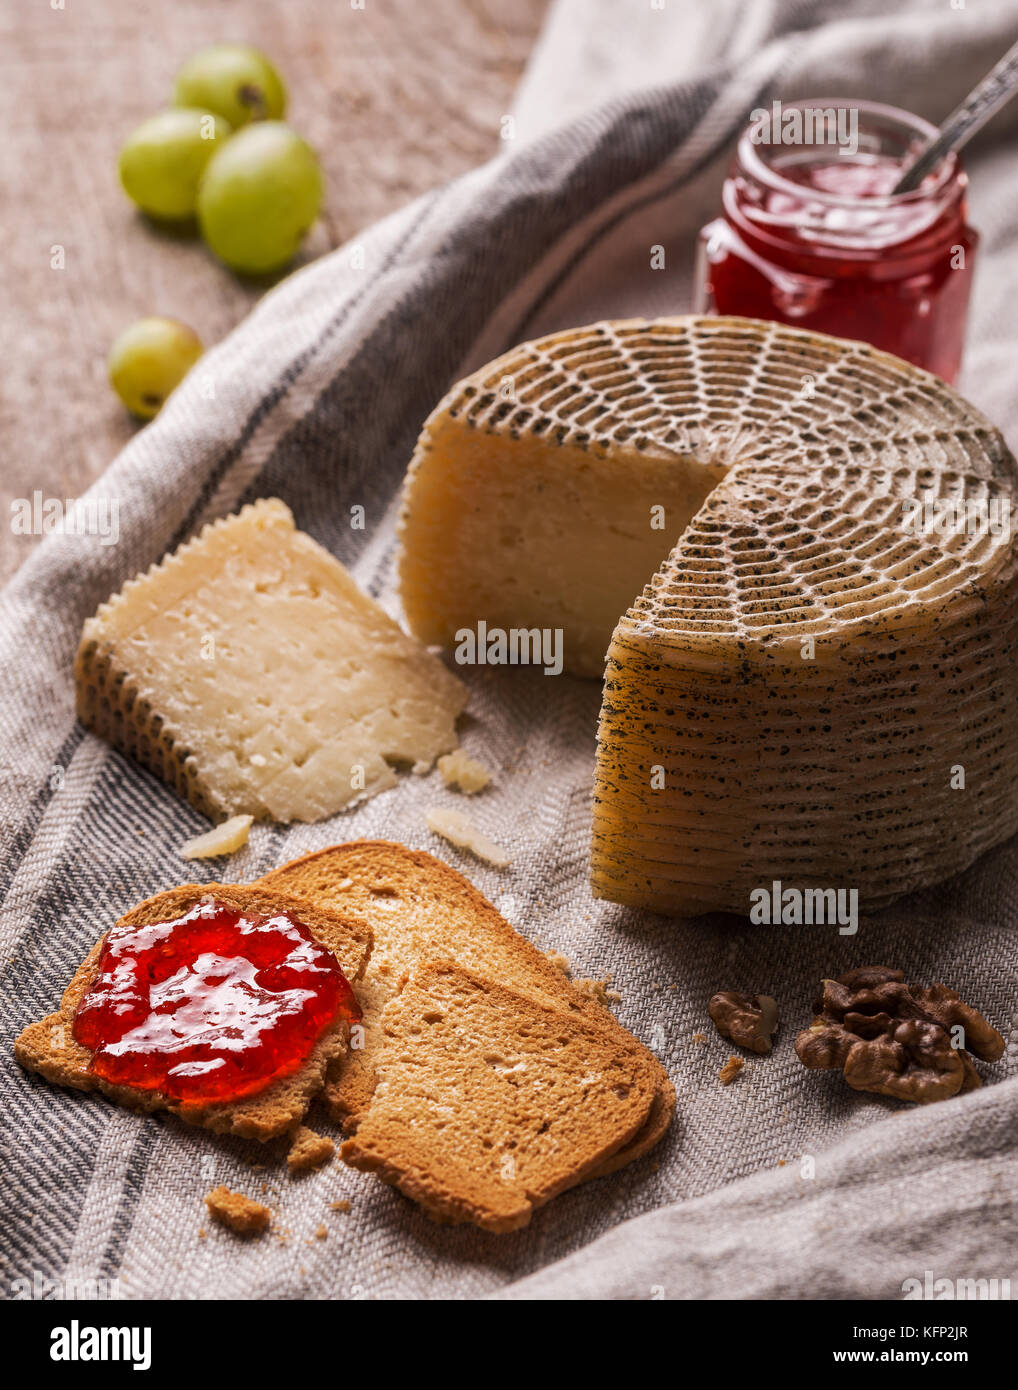 Still life with goat cheese, bread slices and jam Stock Photo